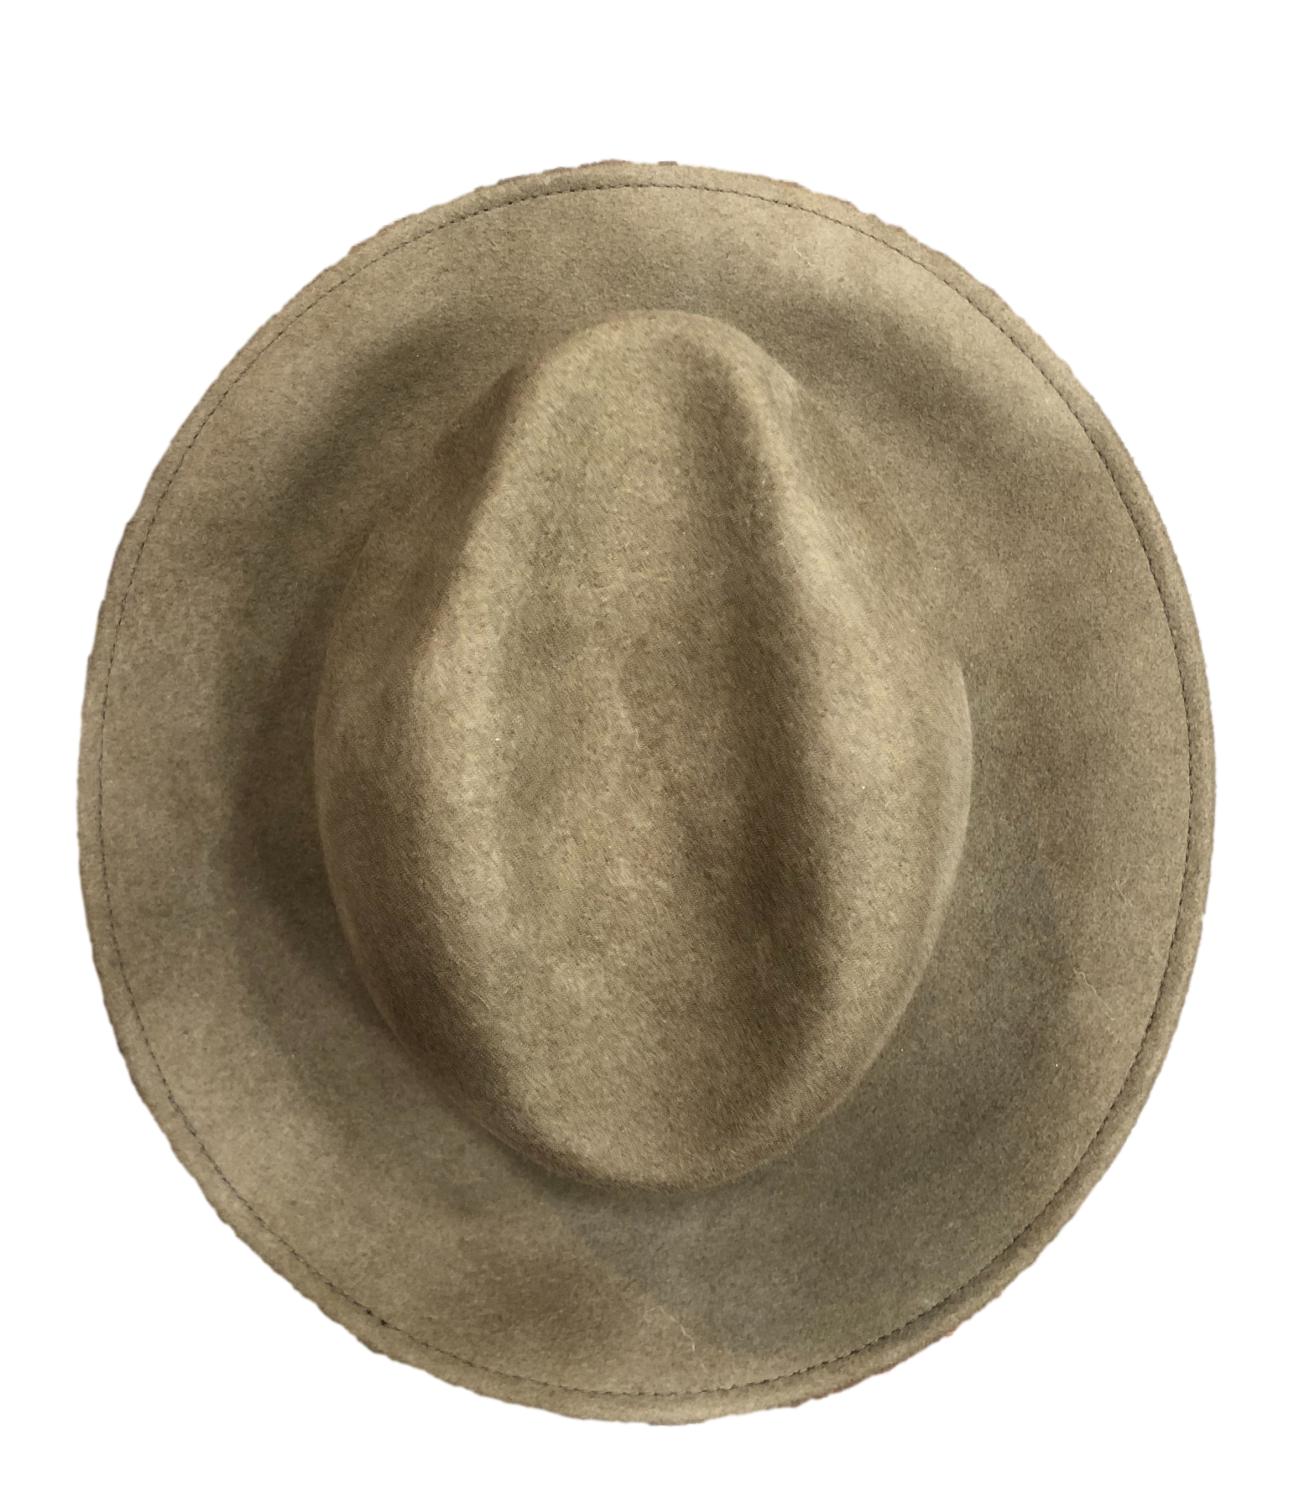 Women's camel COUNTRY hat